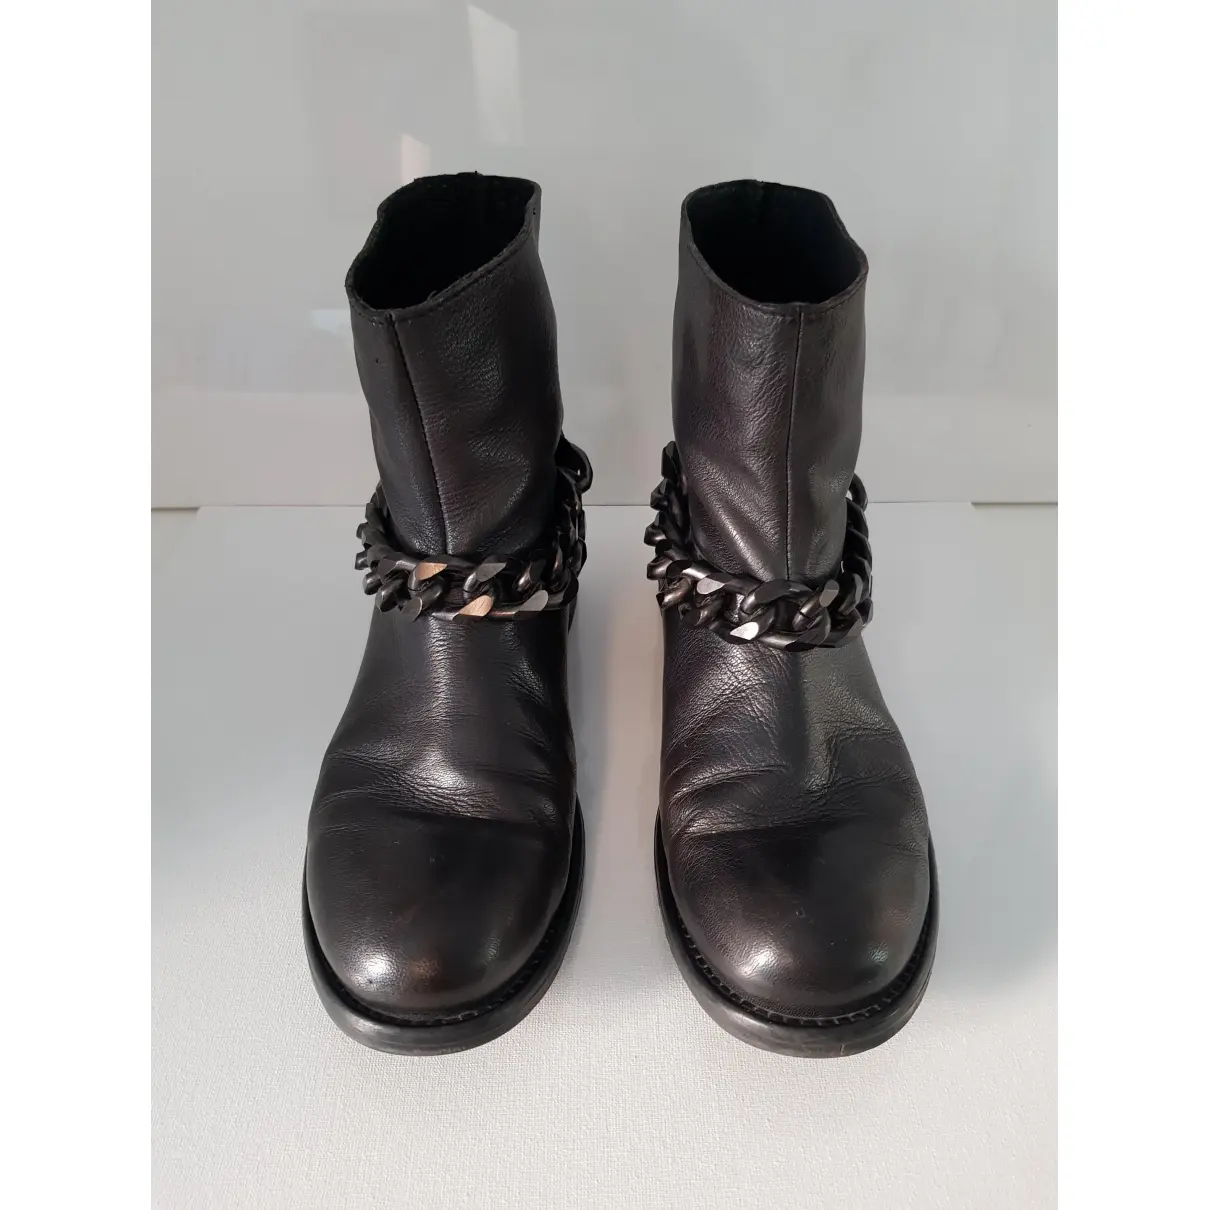 Buy MINELLI Leather buckled boots online